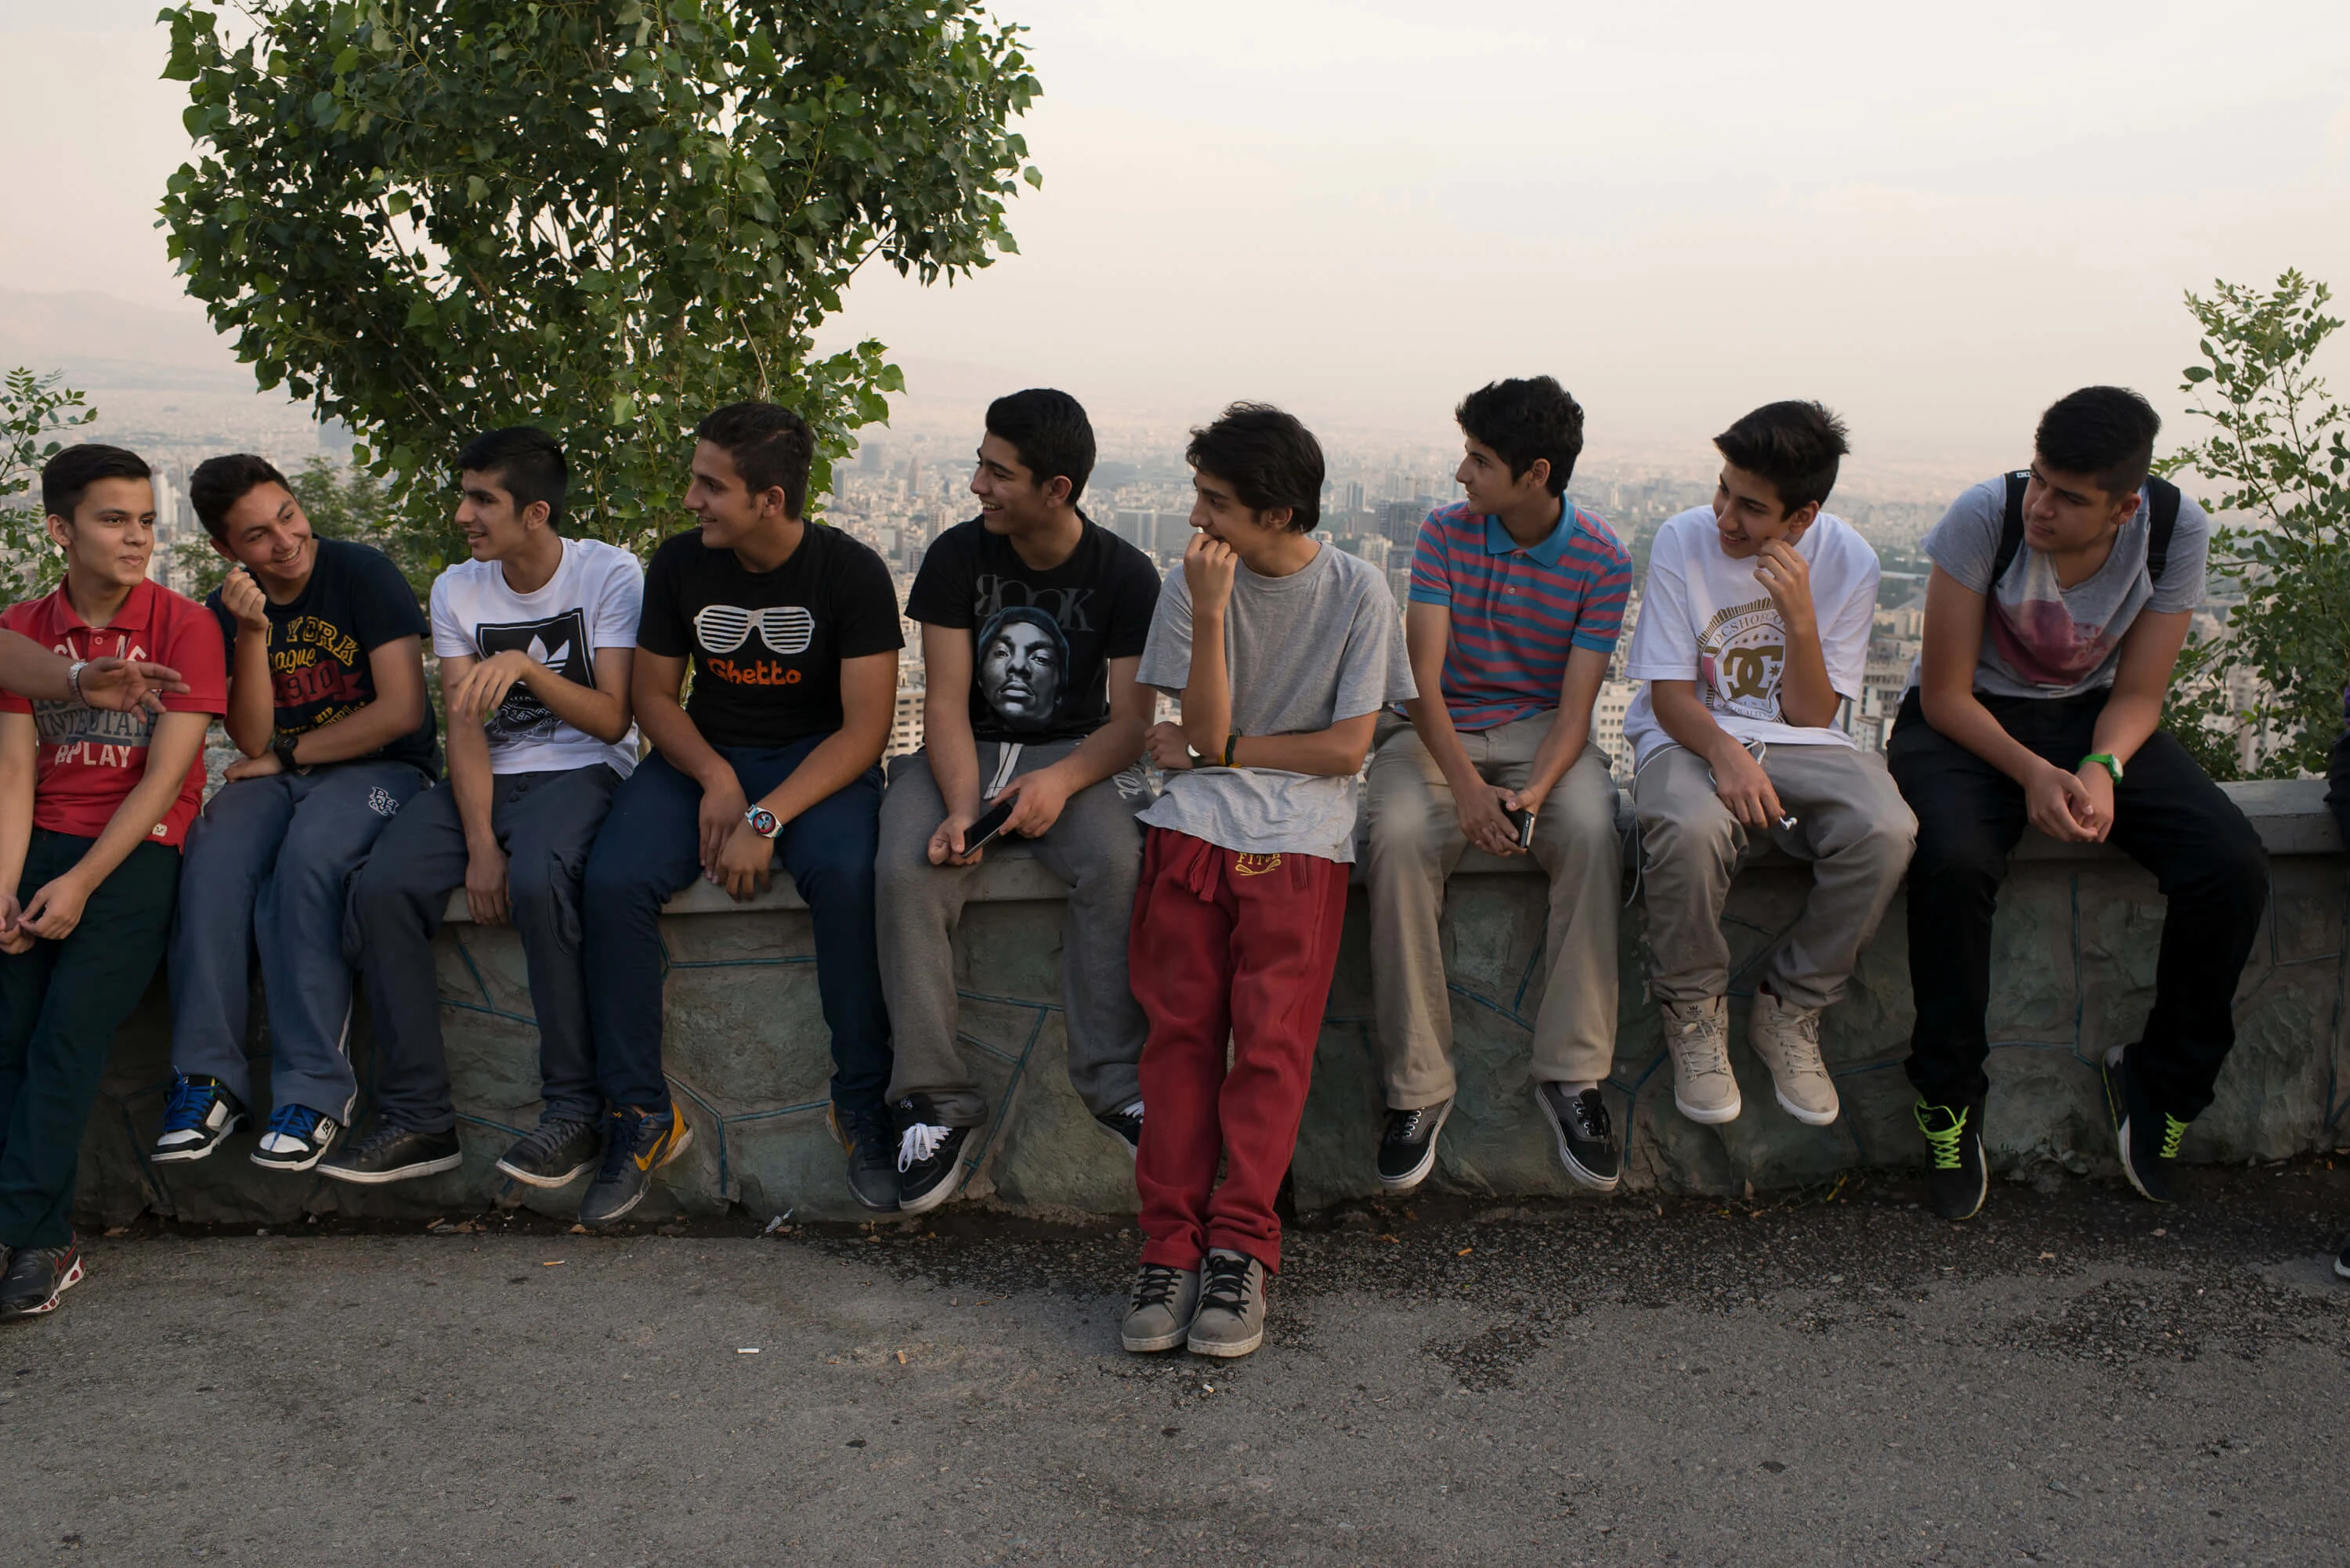 A group of teenage boys hang out at Baam e Tehran (the Roof of Tehran) during No Rouz holiday, which marks the beginning of Iranian new year.